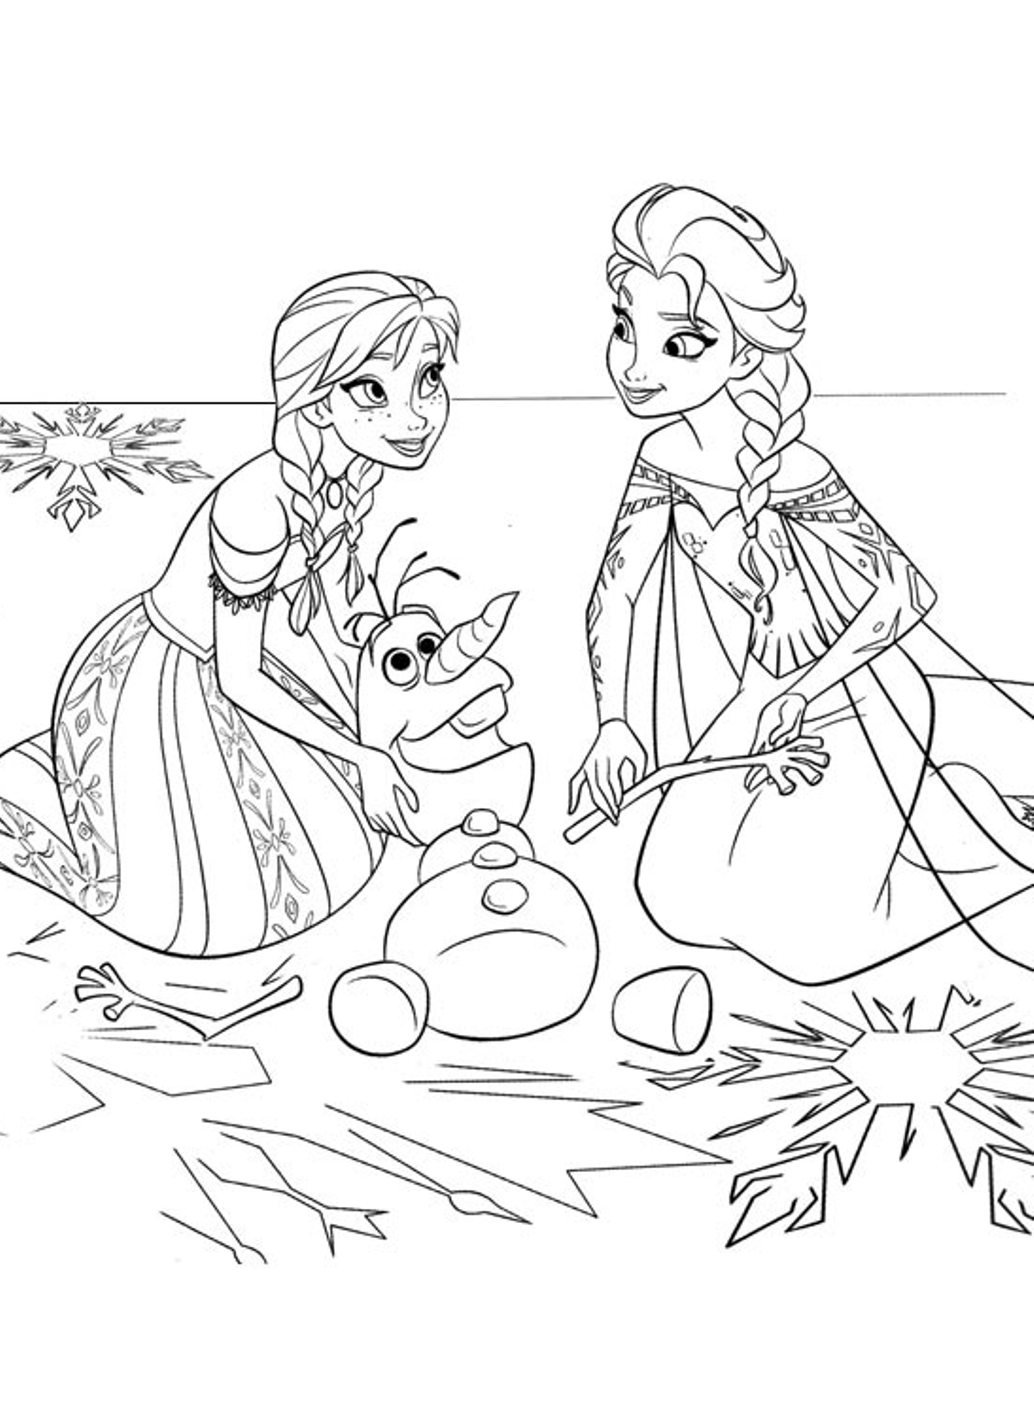 Elsa And Anna Help Olaf To Recover